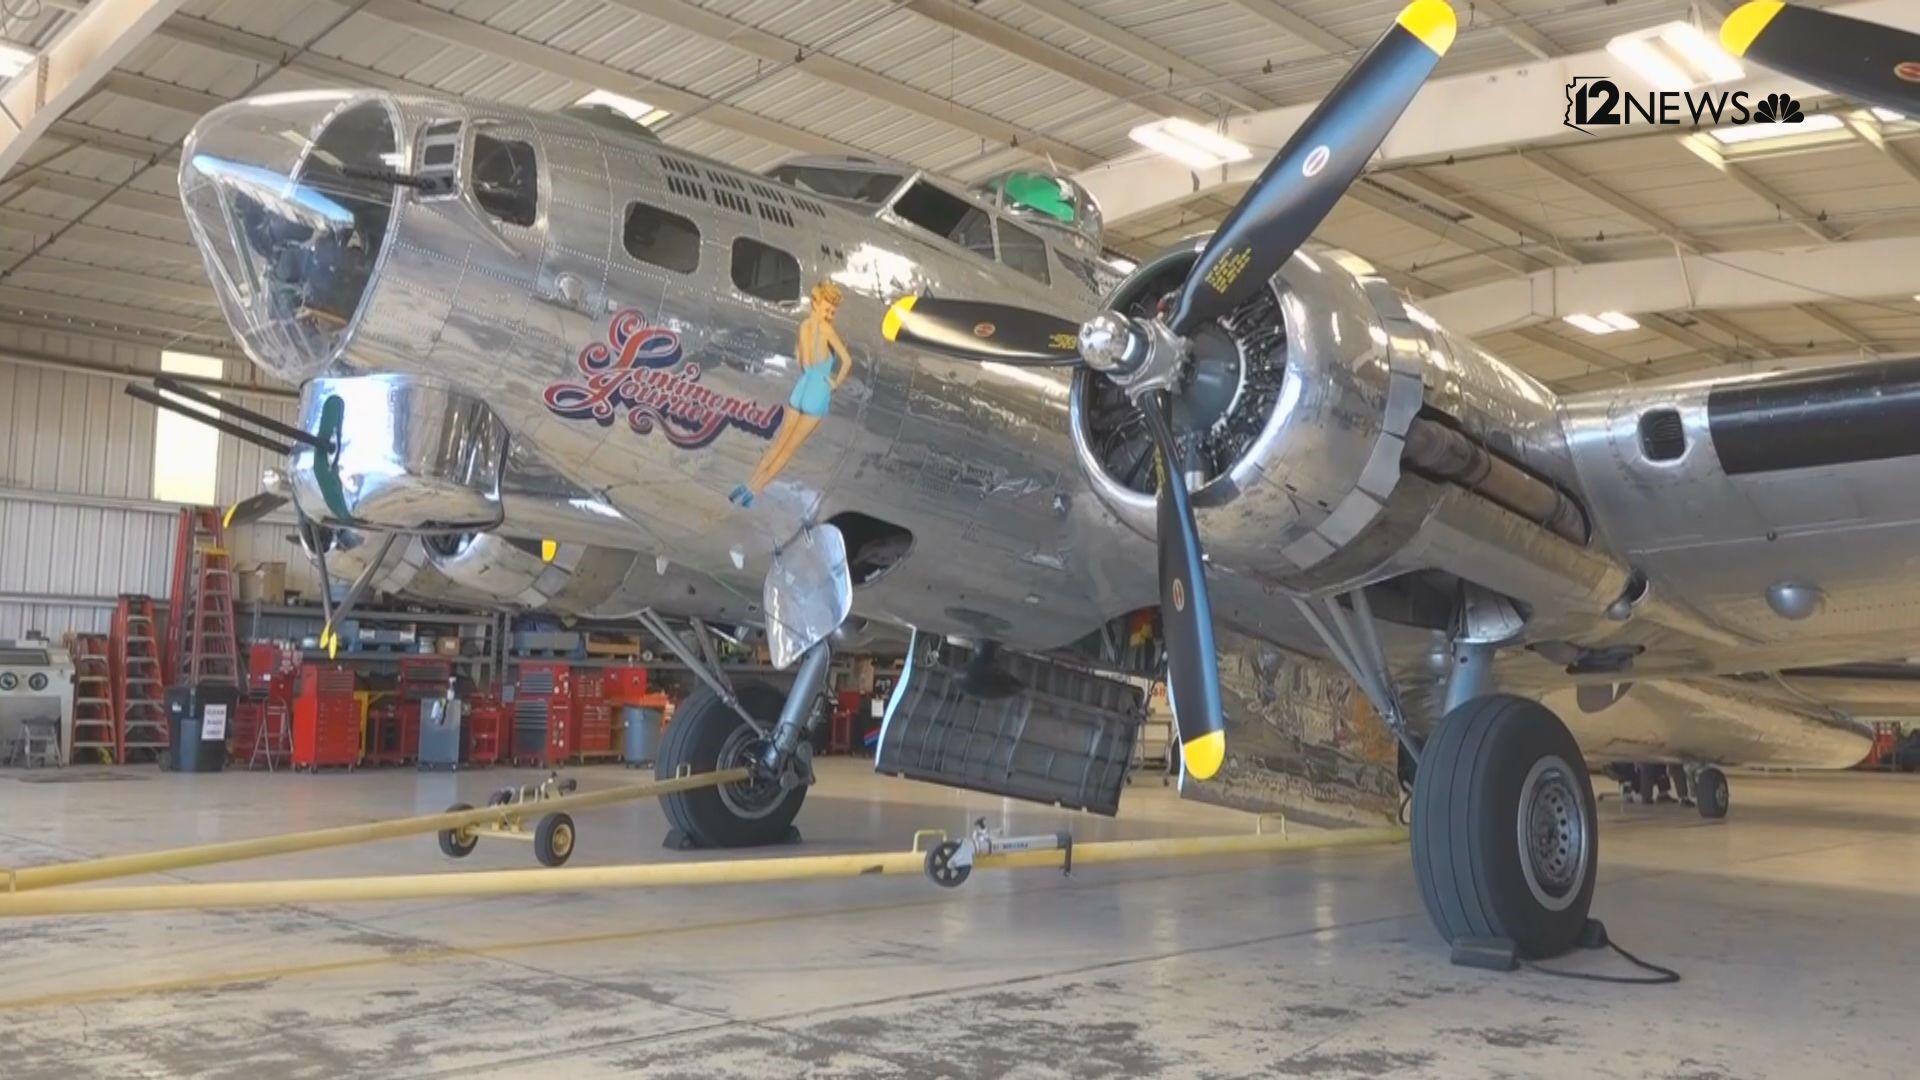 Students studied Sentimental Journey, a WWII B-17, ahead of an aviation excavation mission to France. It's giving them a sense of purpose in service to the country.